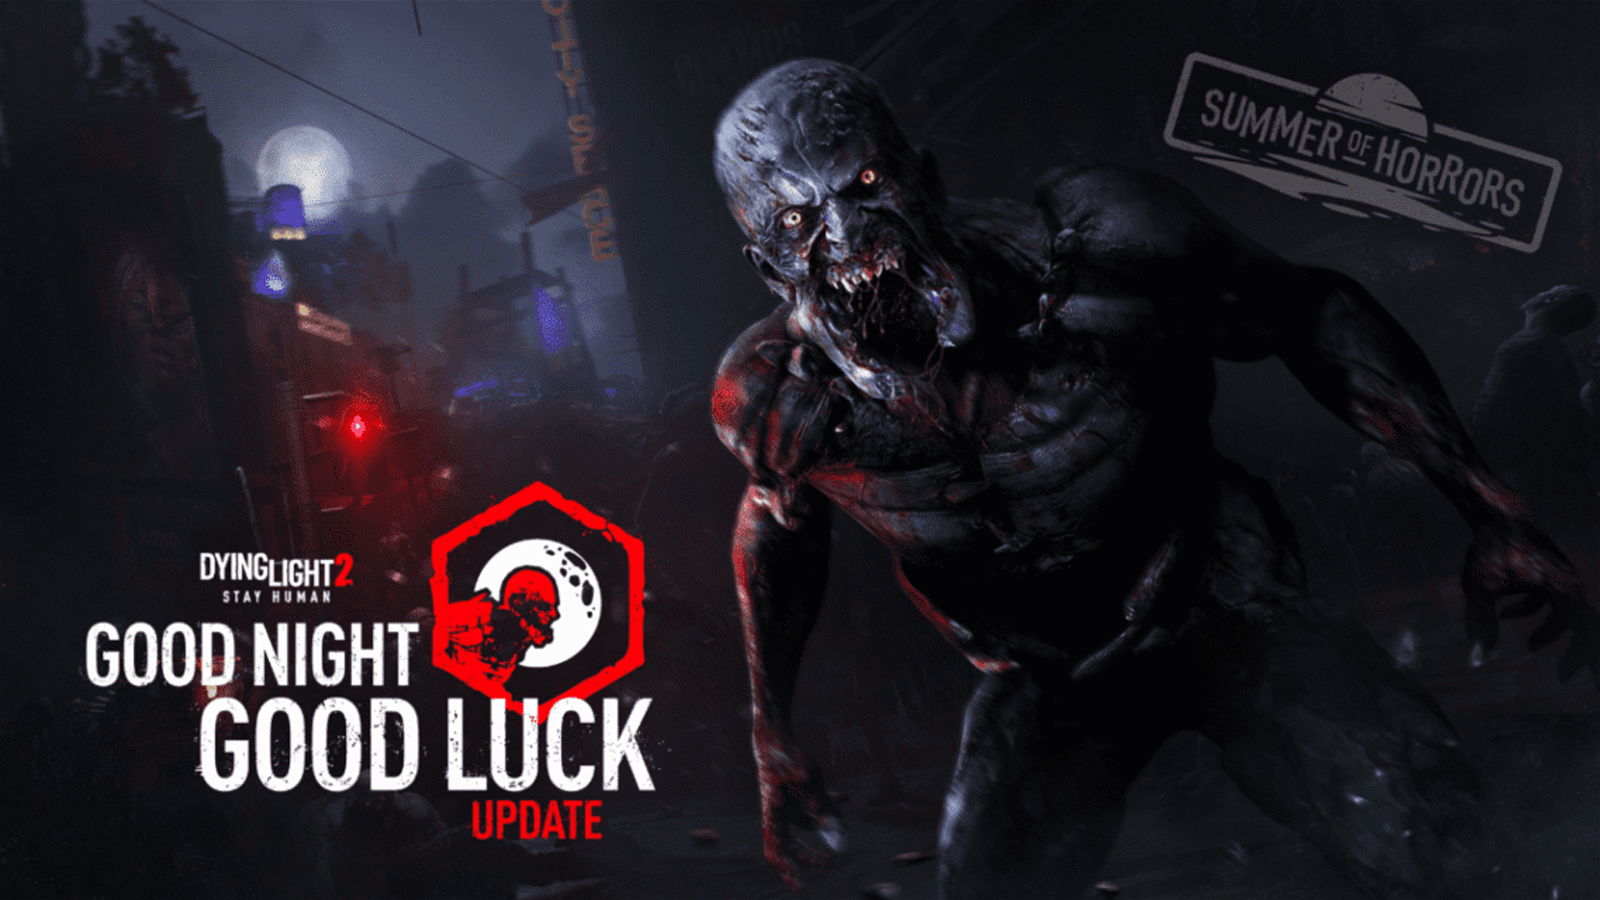 The last big update for Dying Light 2 was the Good Night Good Luck Update